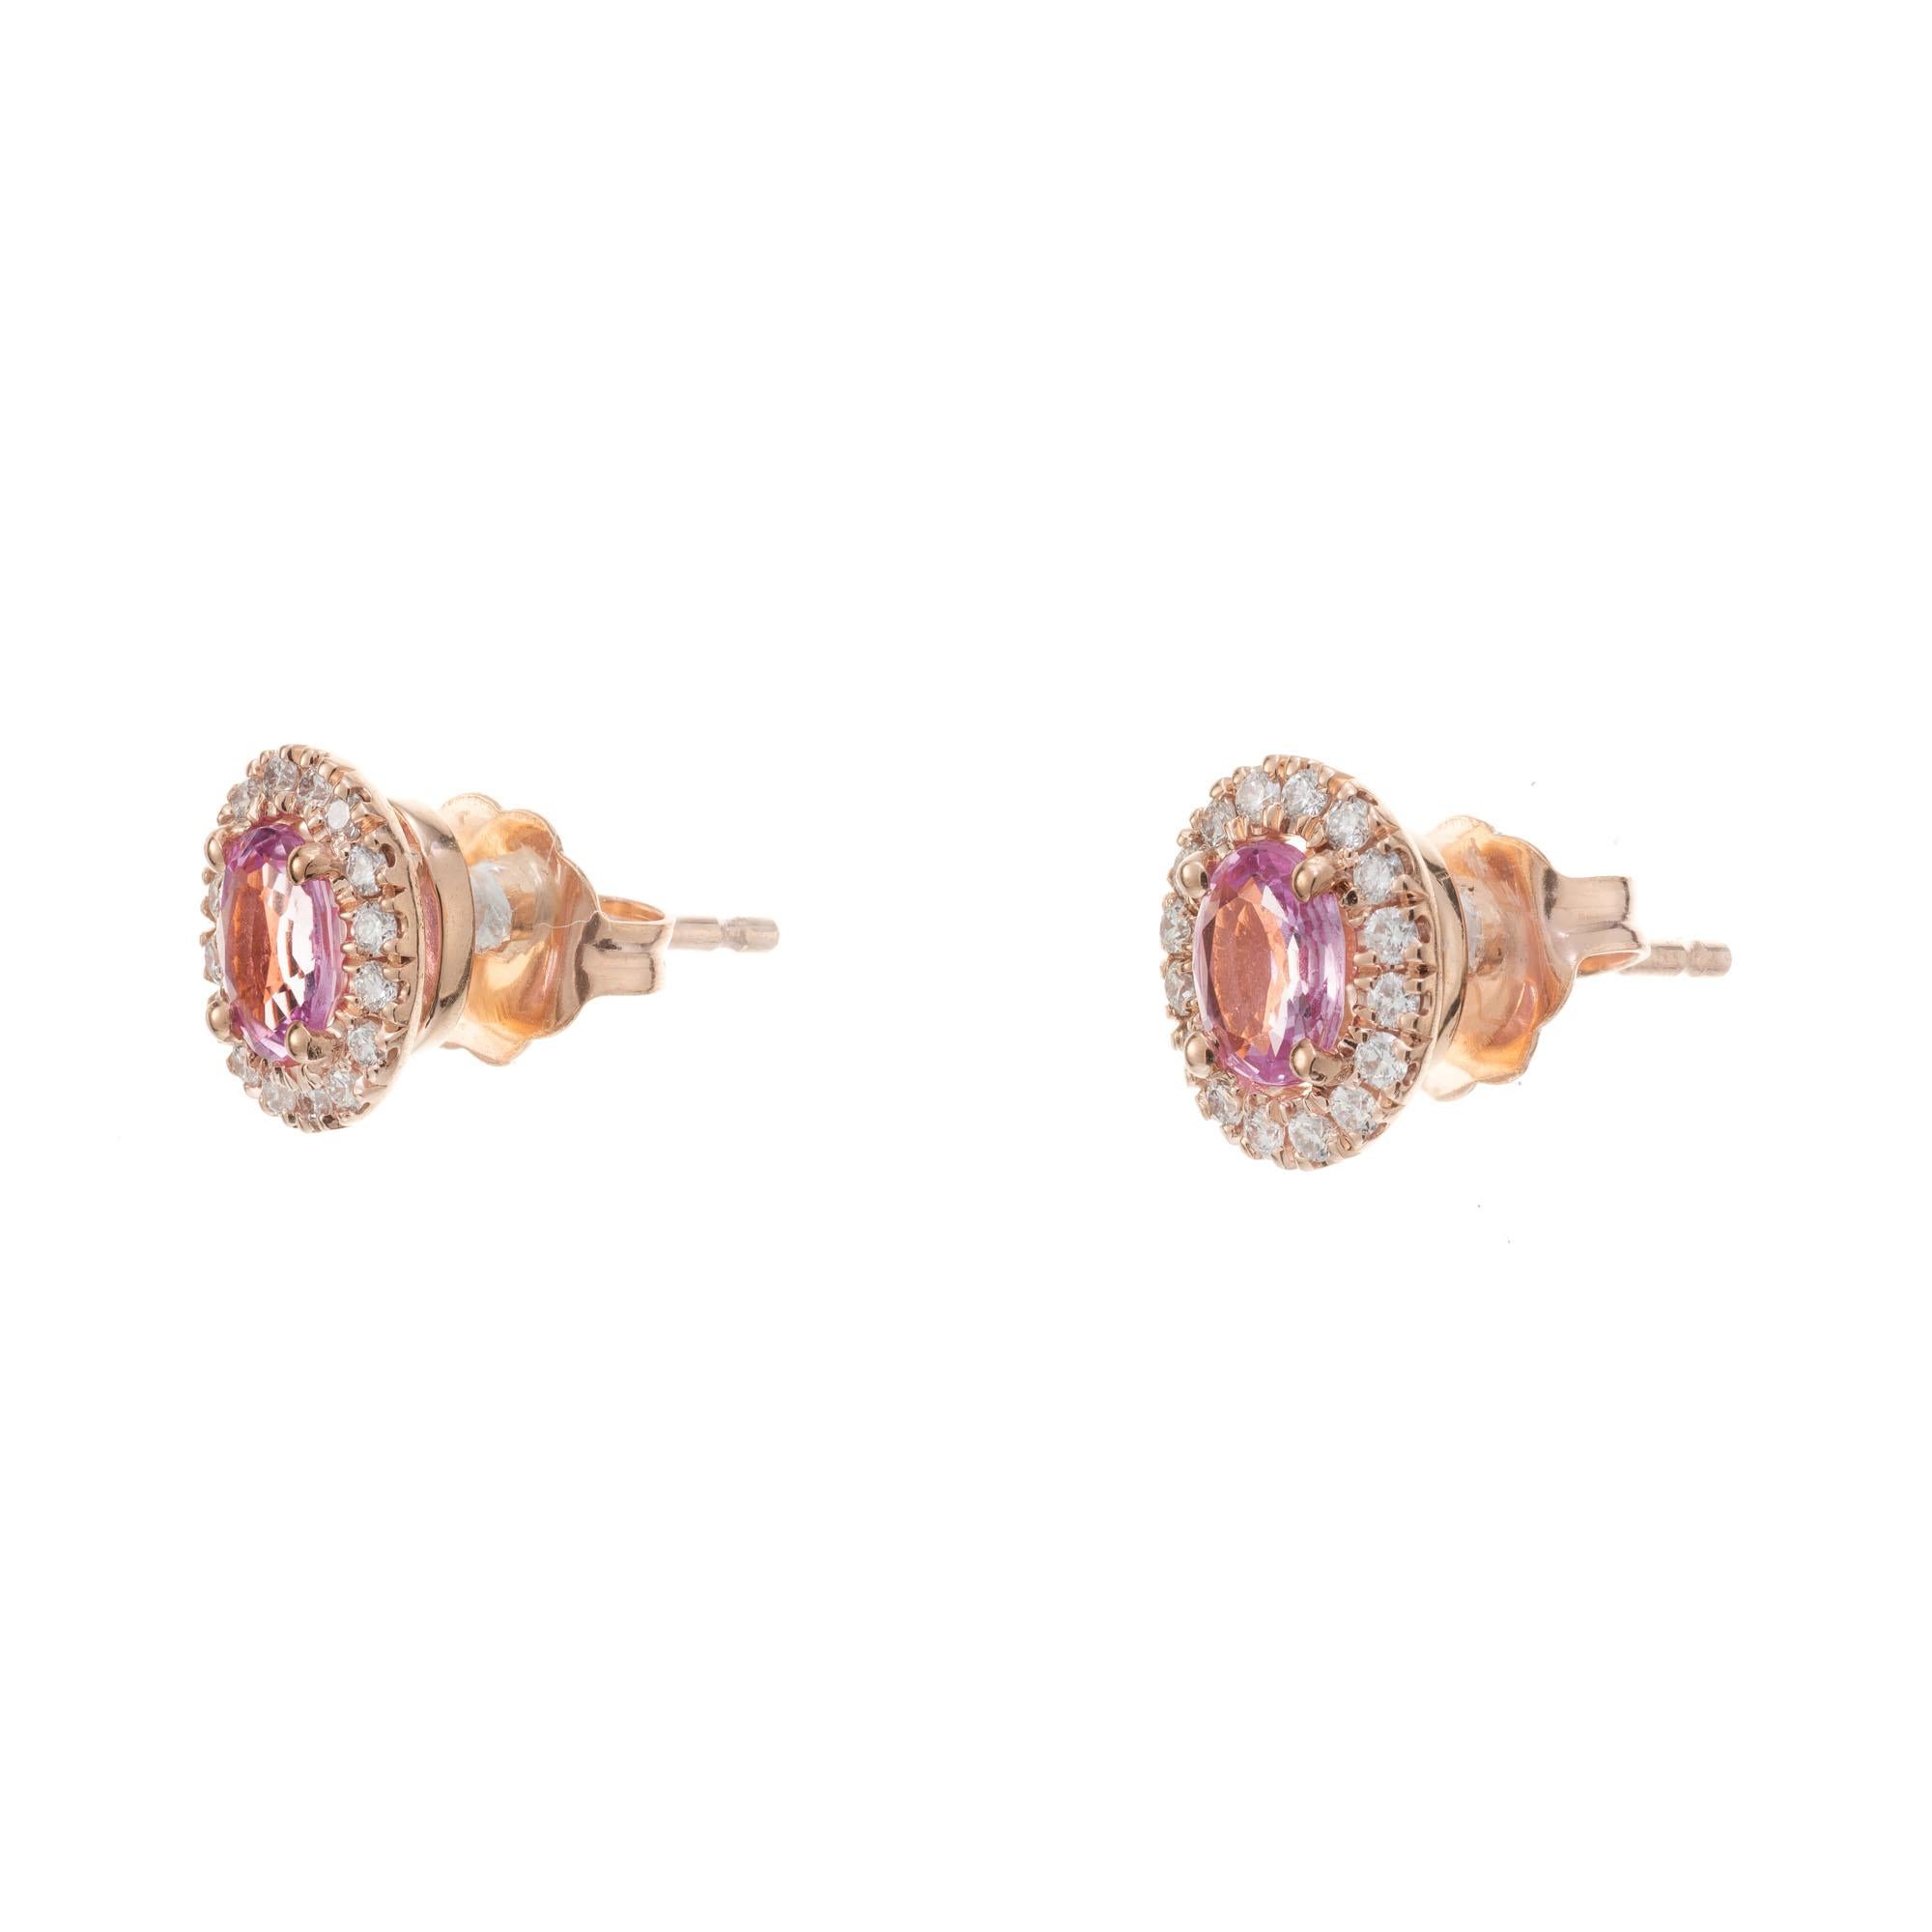 Natural pink sapphire a diamond stud earrings. 2 oval pink sapphires with a halo of round brilliant cut diamonds set in 14k rose gold baskets. Designed and crafted in the Peter Suchy workshop 

2 oval pink sapphires, SI approx. .75cts
32 round